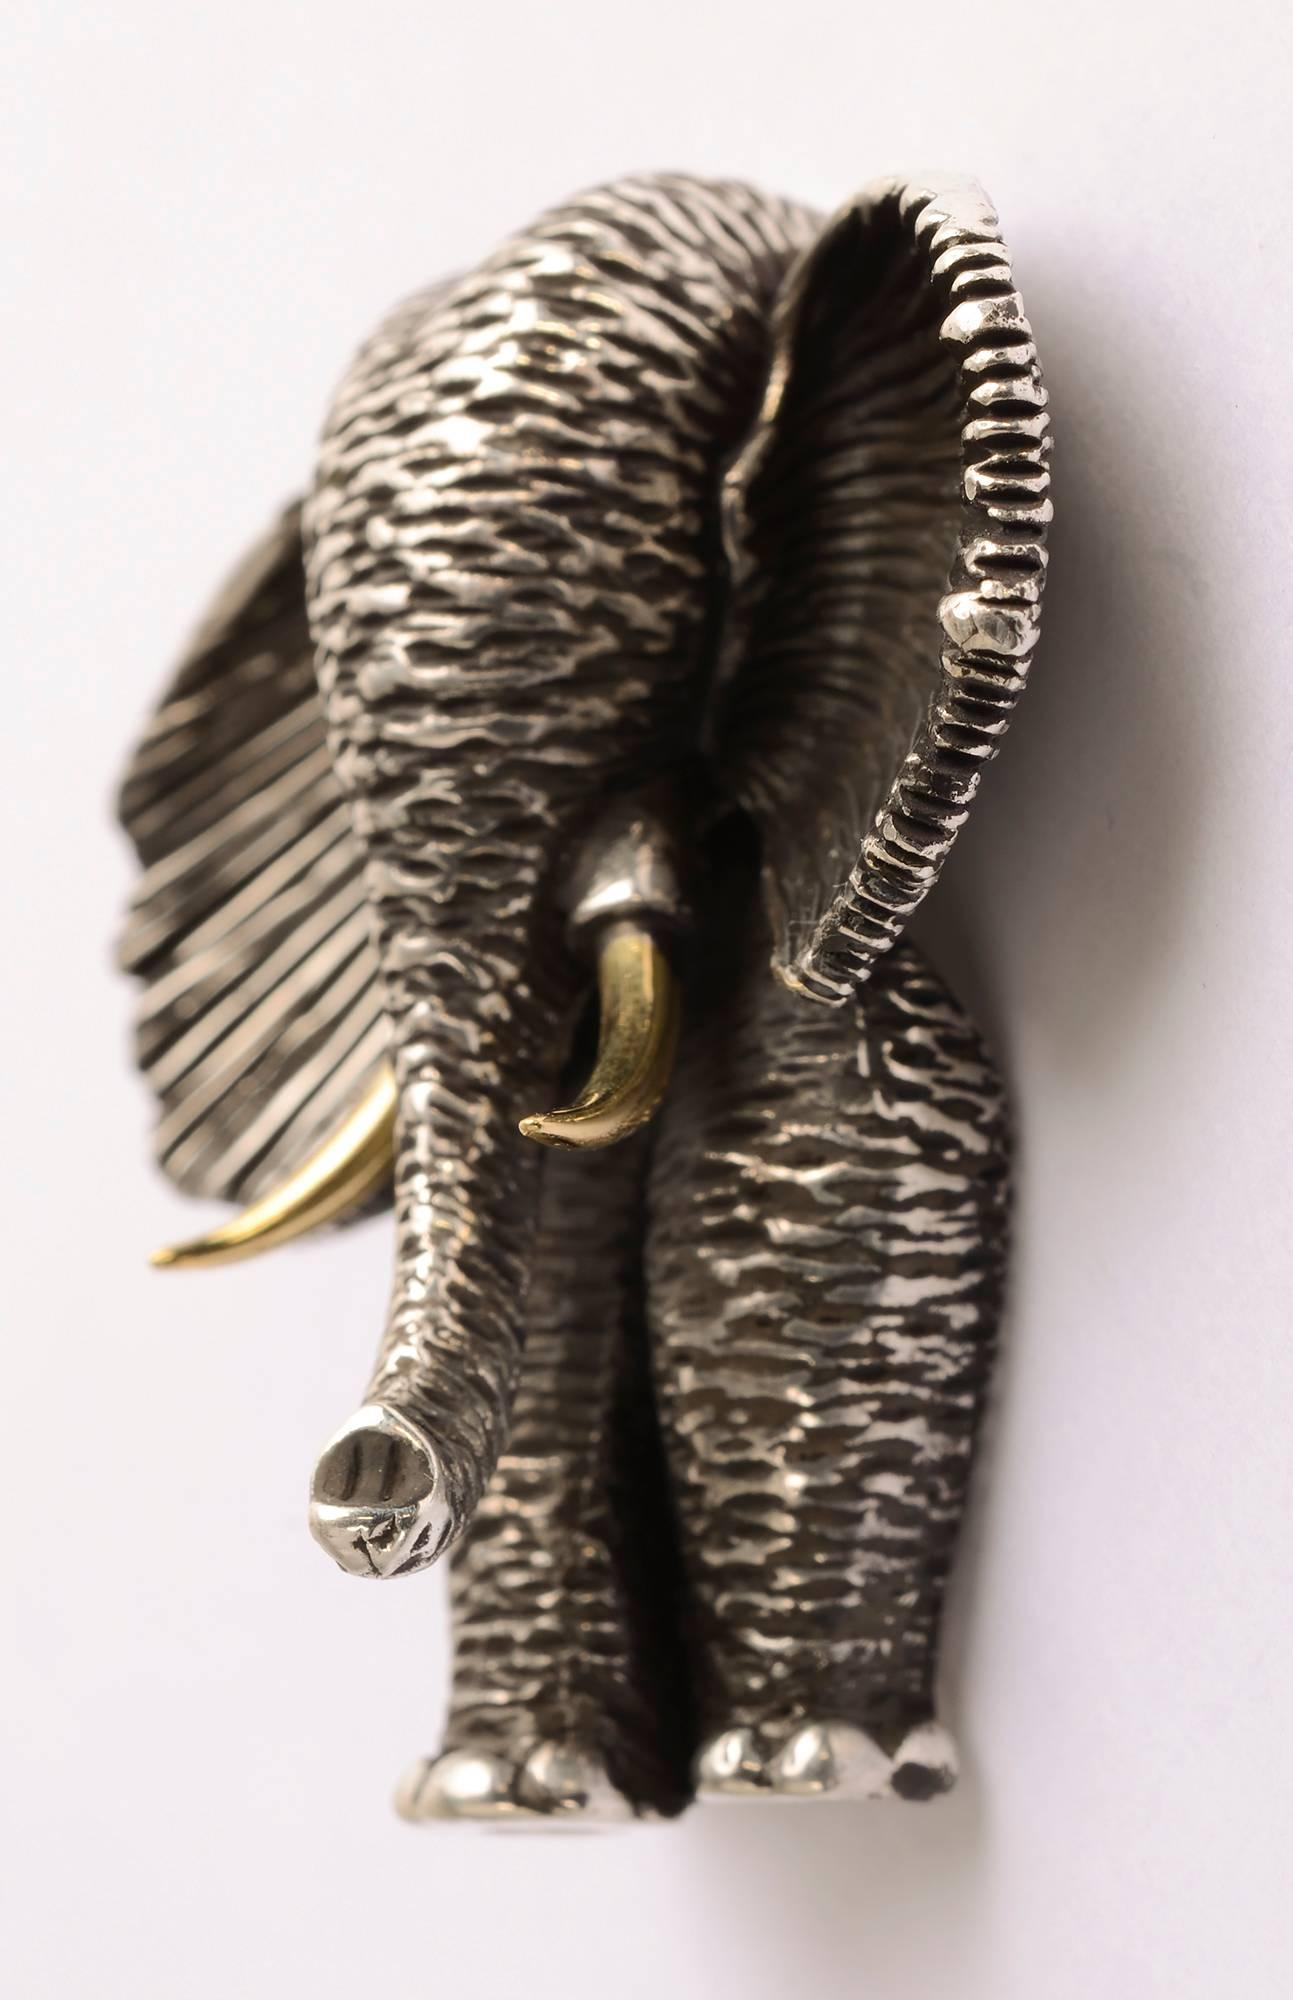 Wonderfully sculptural elephant brooch by American designer, Henry Dunay. The sterling silver body is well textured. The tusks are gold, perhaps to represent how precious they are. The brooch measures 1 3/4 inches in length and 1  5/8 inches from